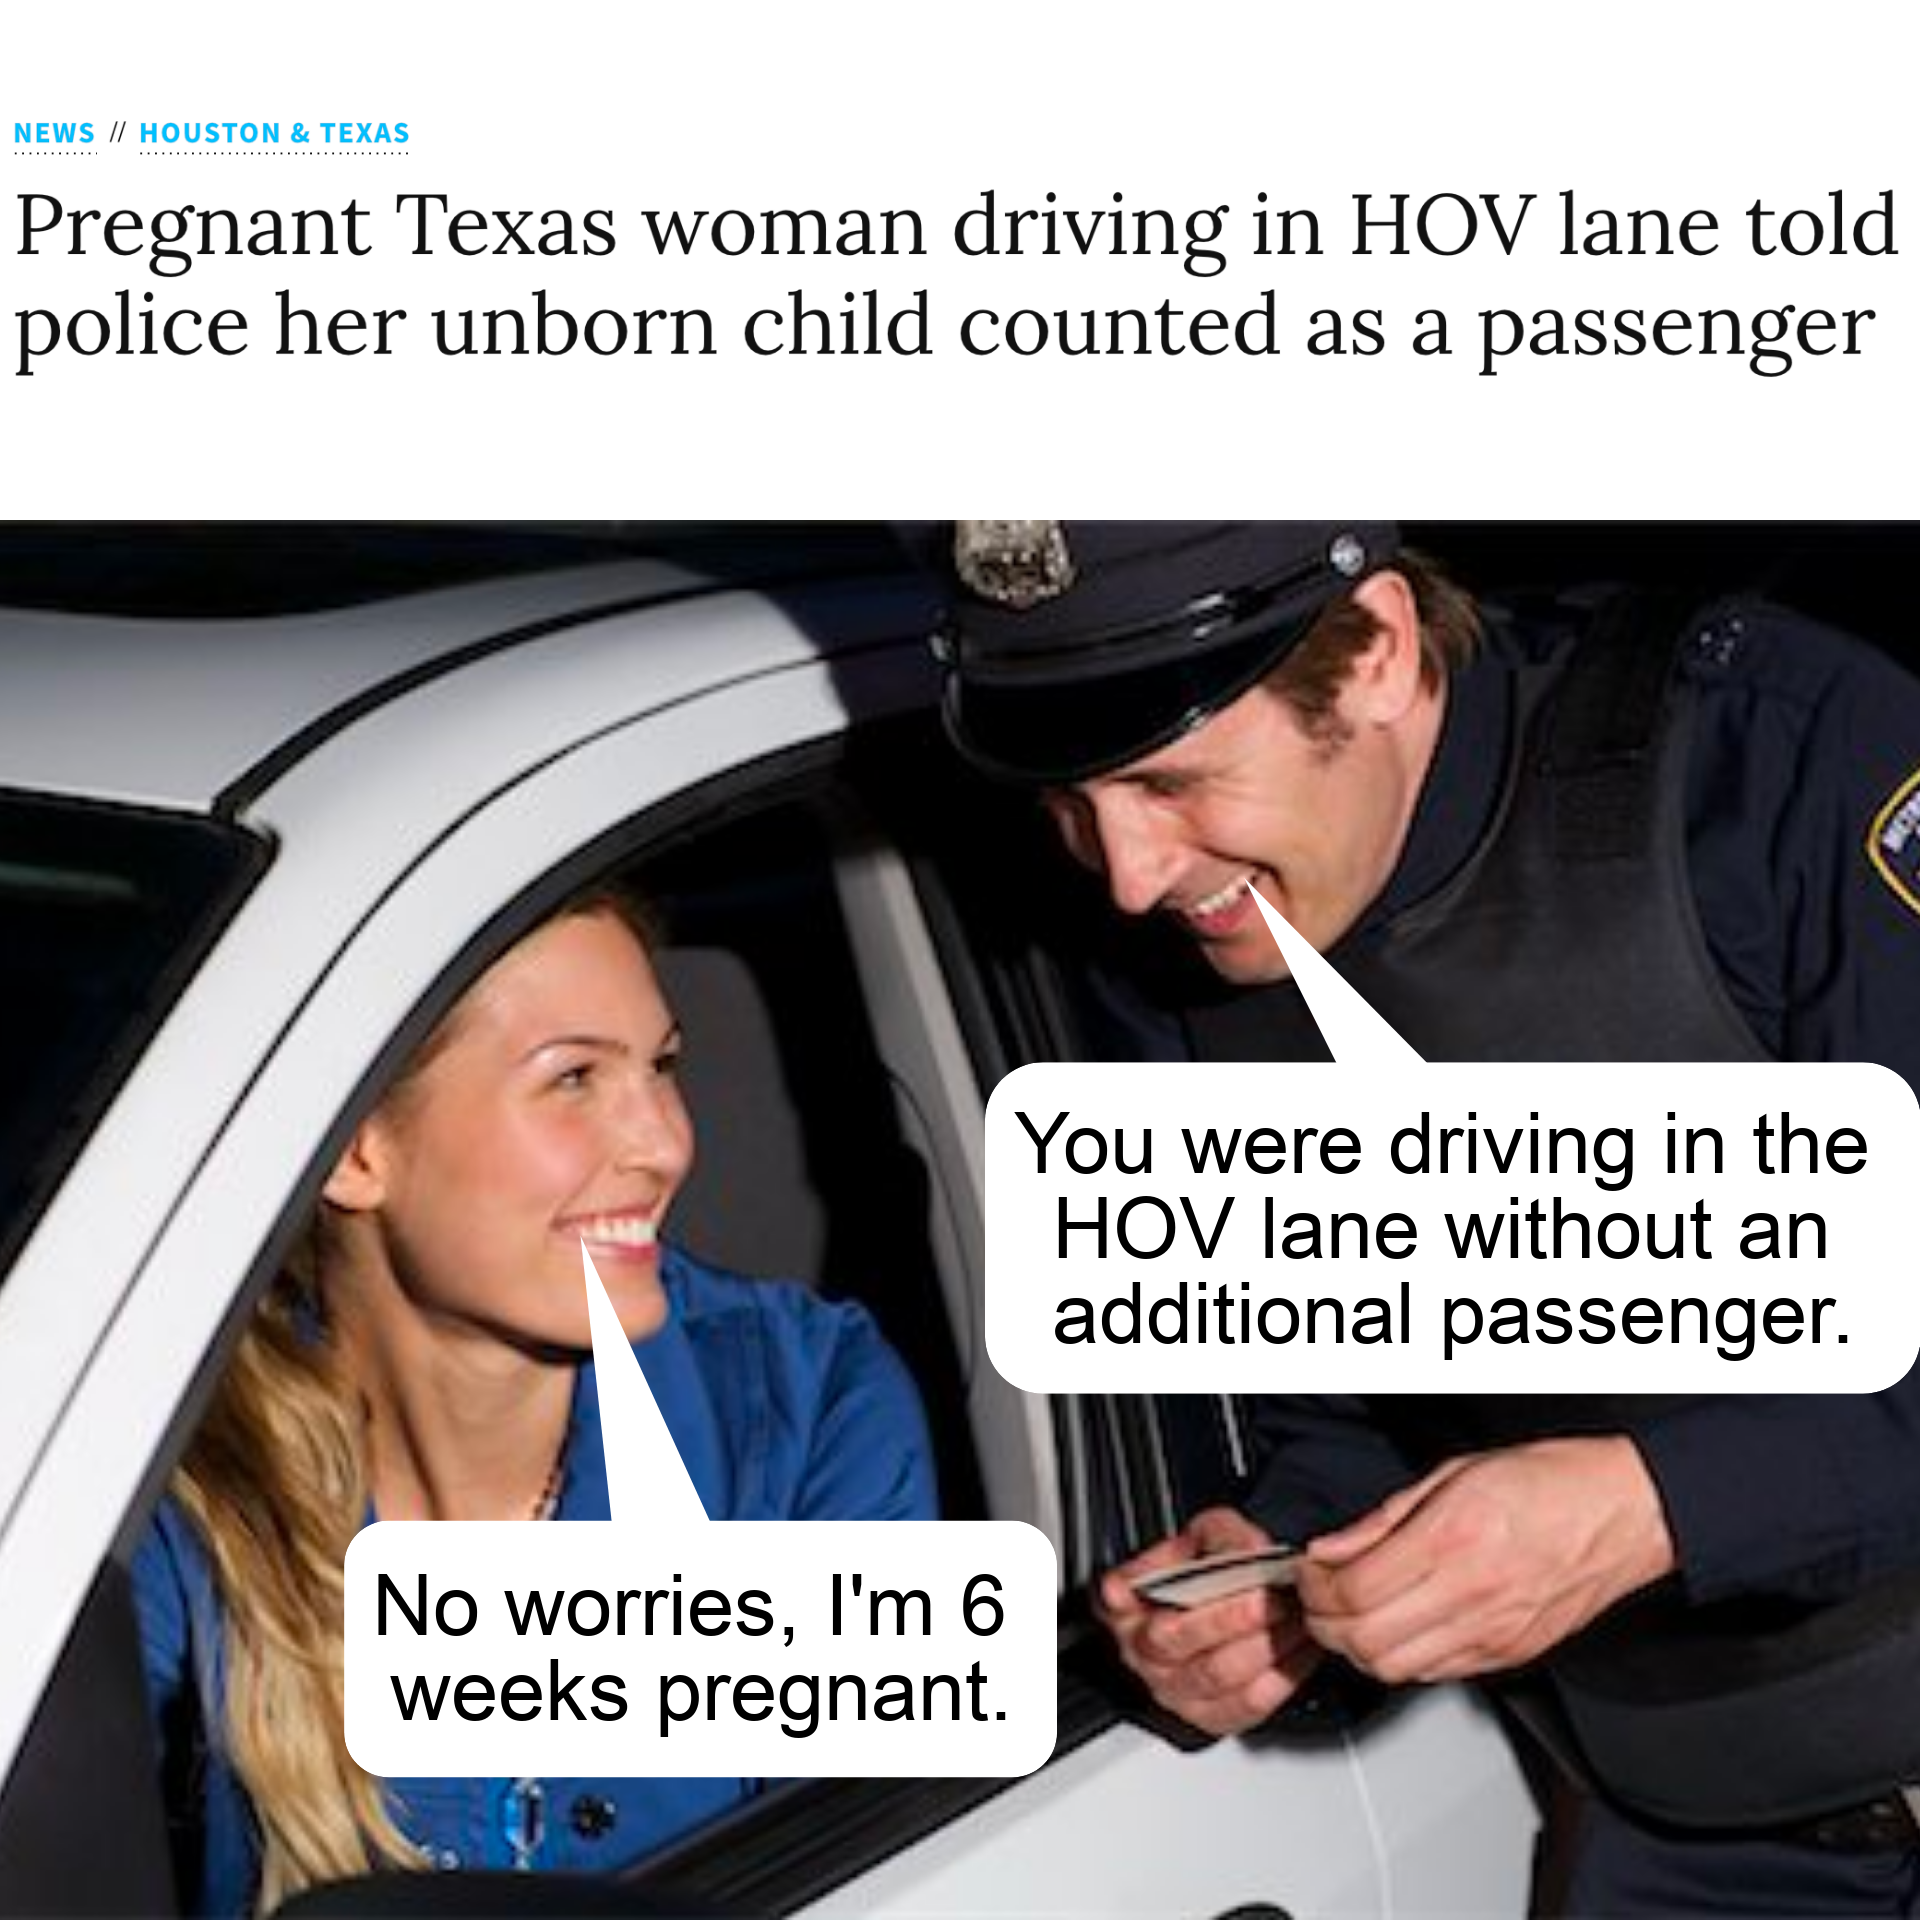 funny memes - dank memes - photo caption - News Houston & Texas Pregnant Texas woman driving in Hov lane told police her unborn child counted as a passenger You were driving in the Hov lane without an additional passenger. No worries, I'm 6 weeks pregnant